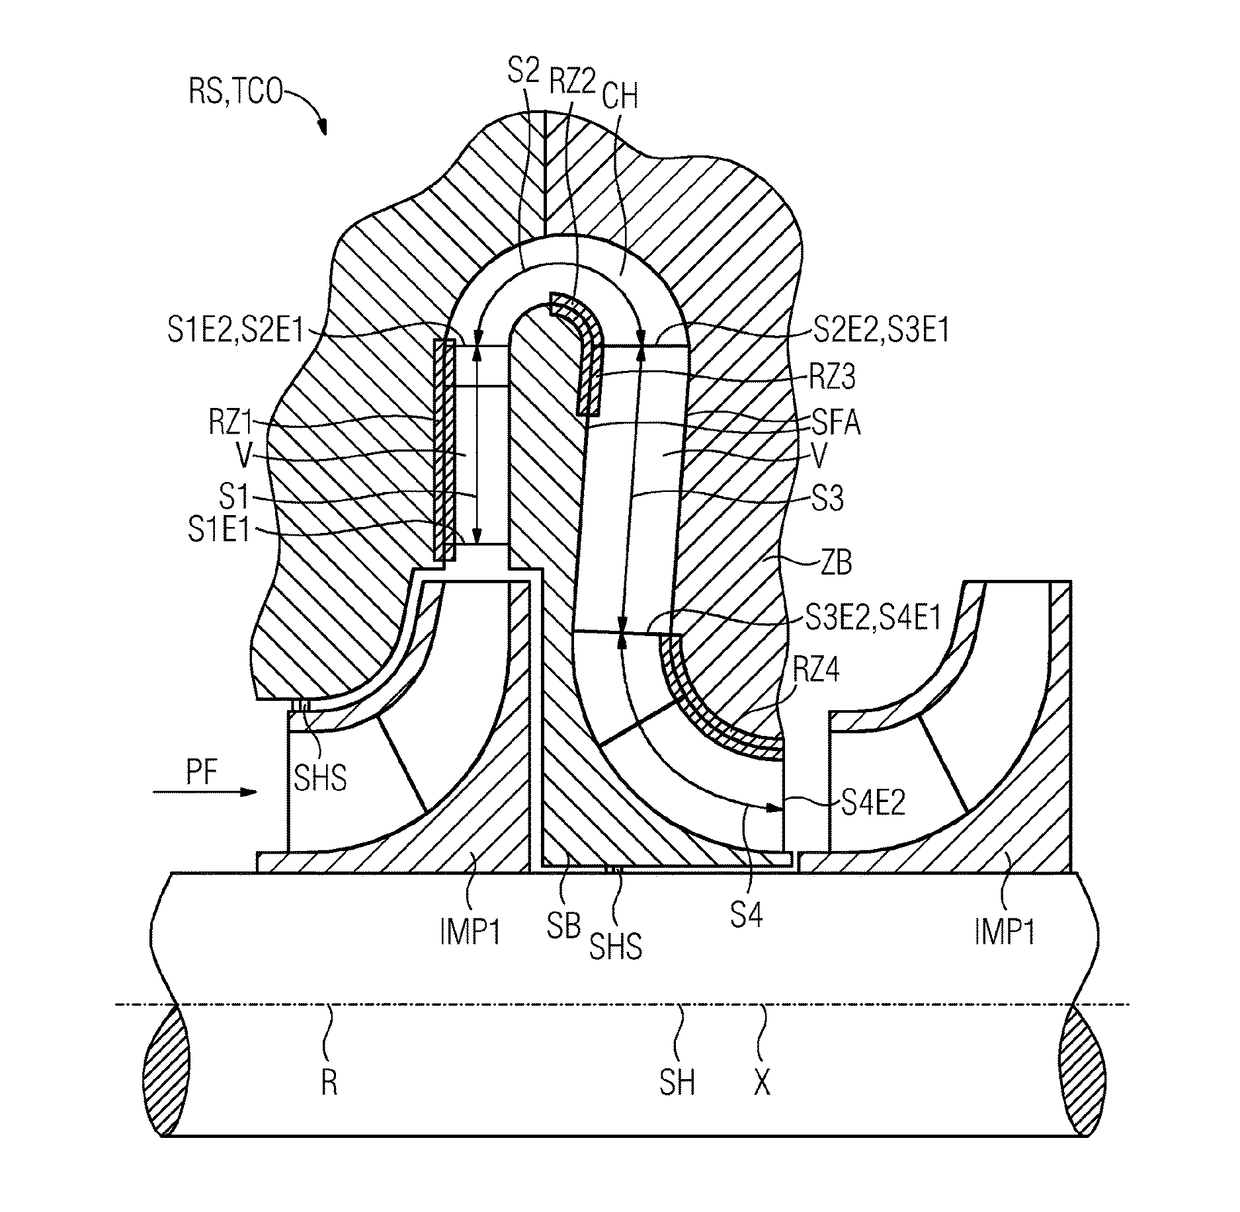 Return stage of a multi-stage turbocompressor or turboexpander having rough wall surfaces